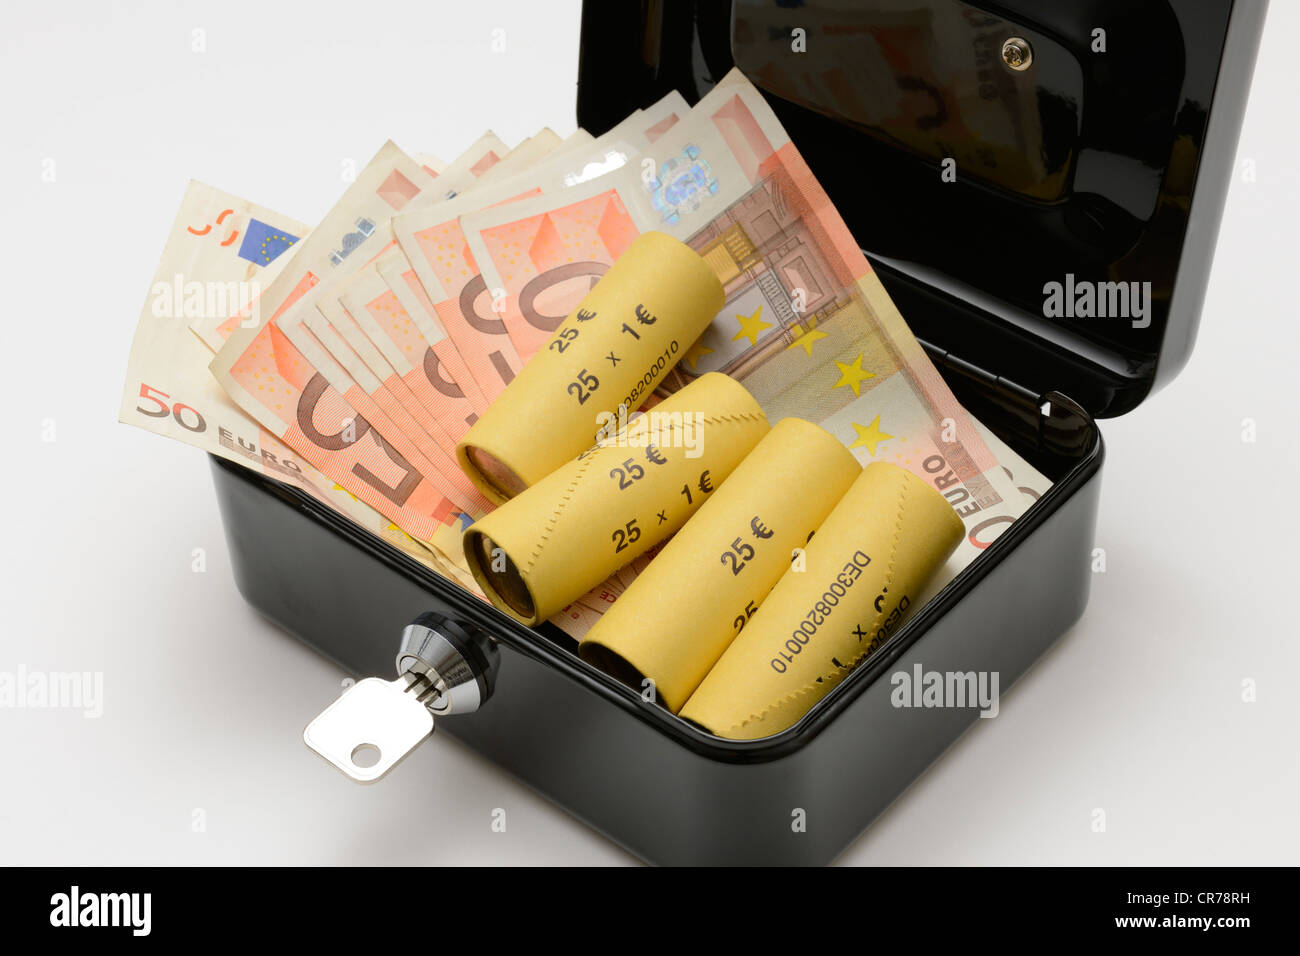 Euro banknotes and rolled up coins in a cash box Stock Photo